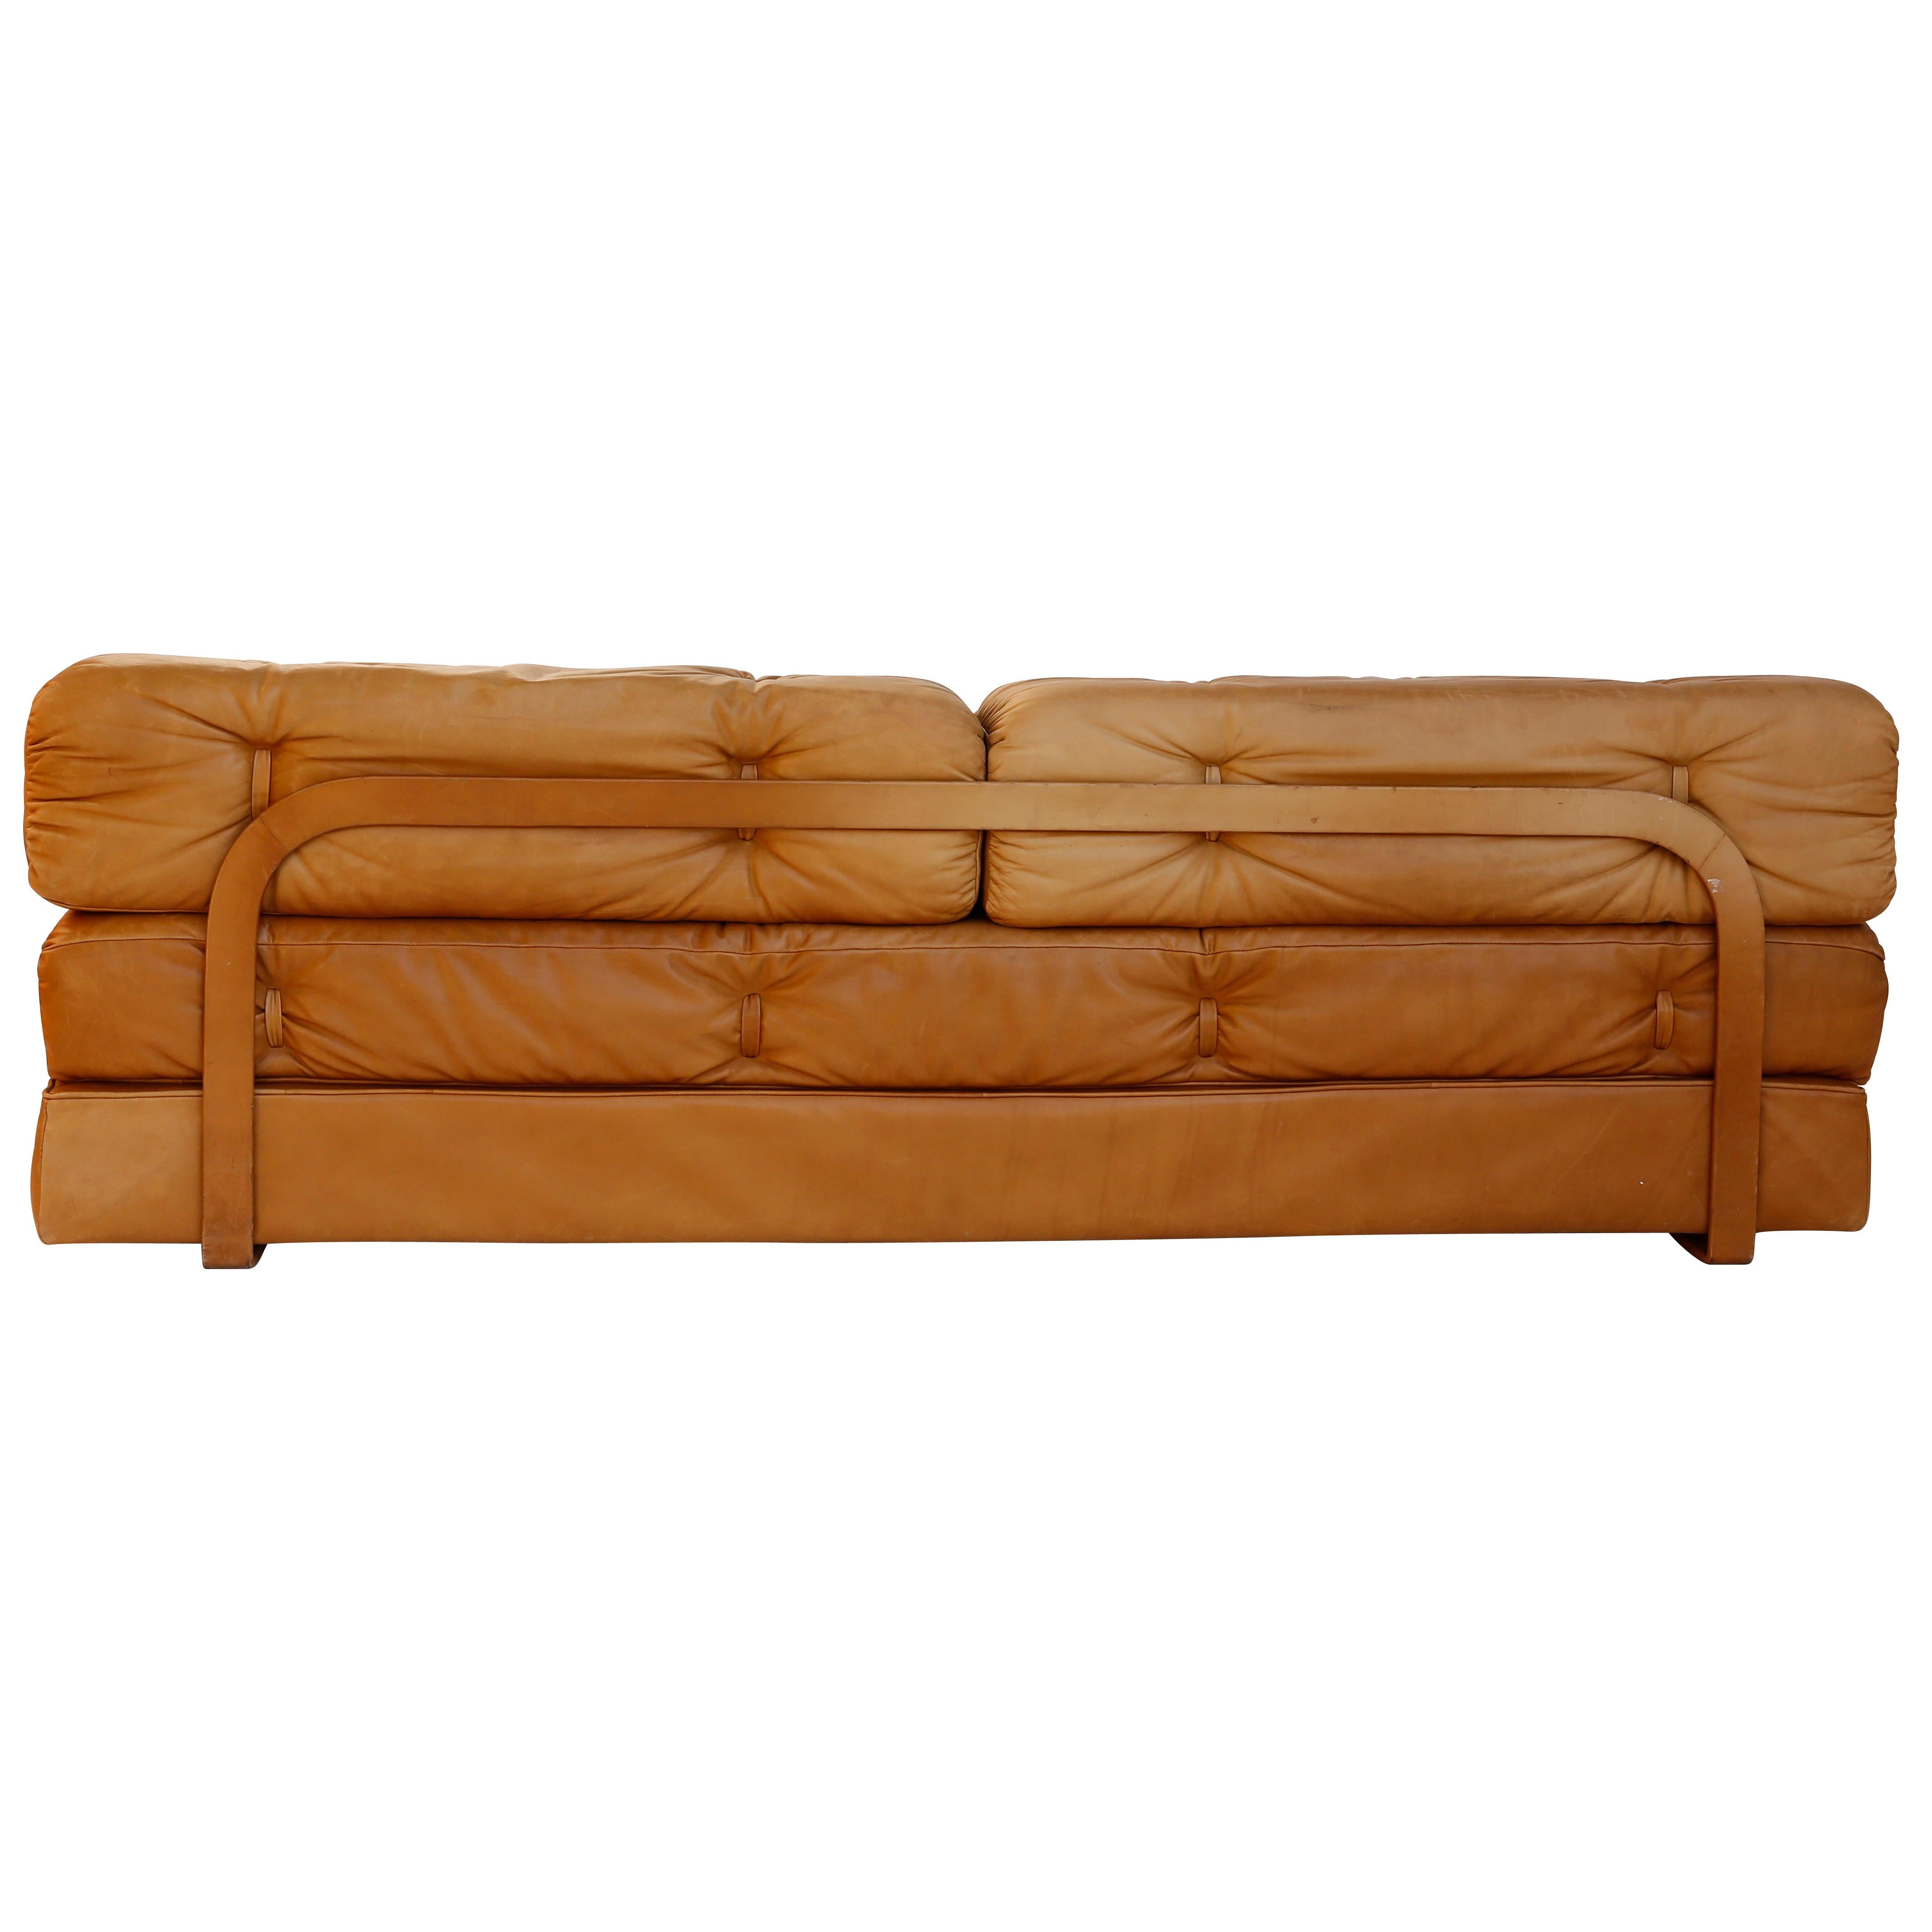 Pair of Chairs Convertable Bed Daybed Sofa 'Atrium', Wittmann, Cognac Leather 12